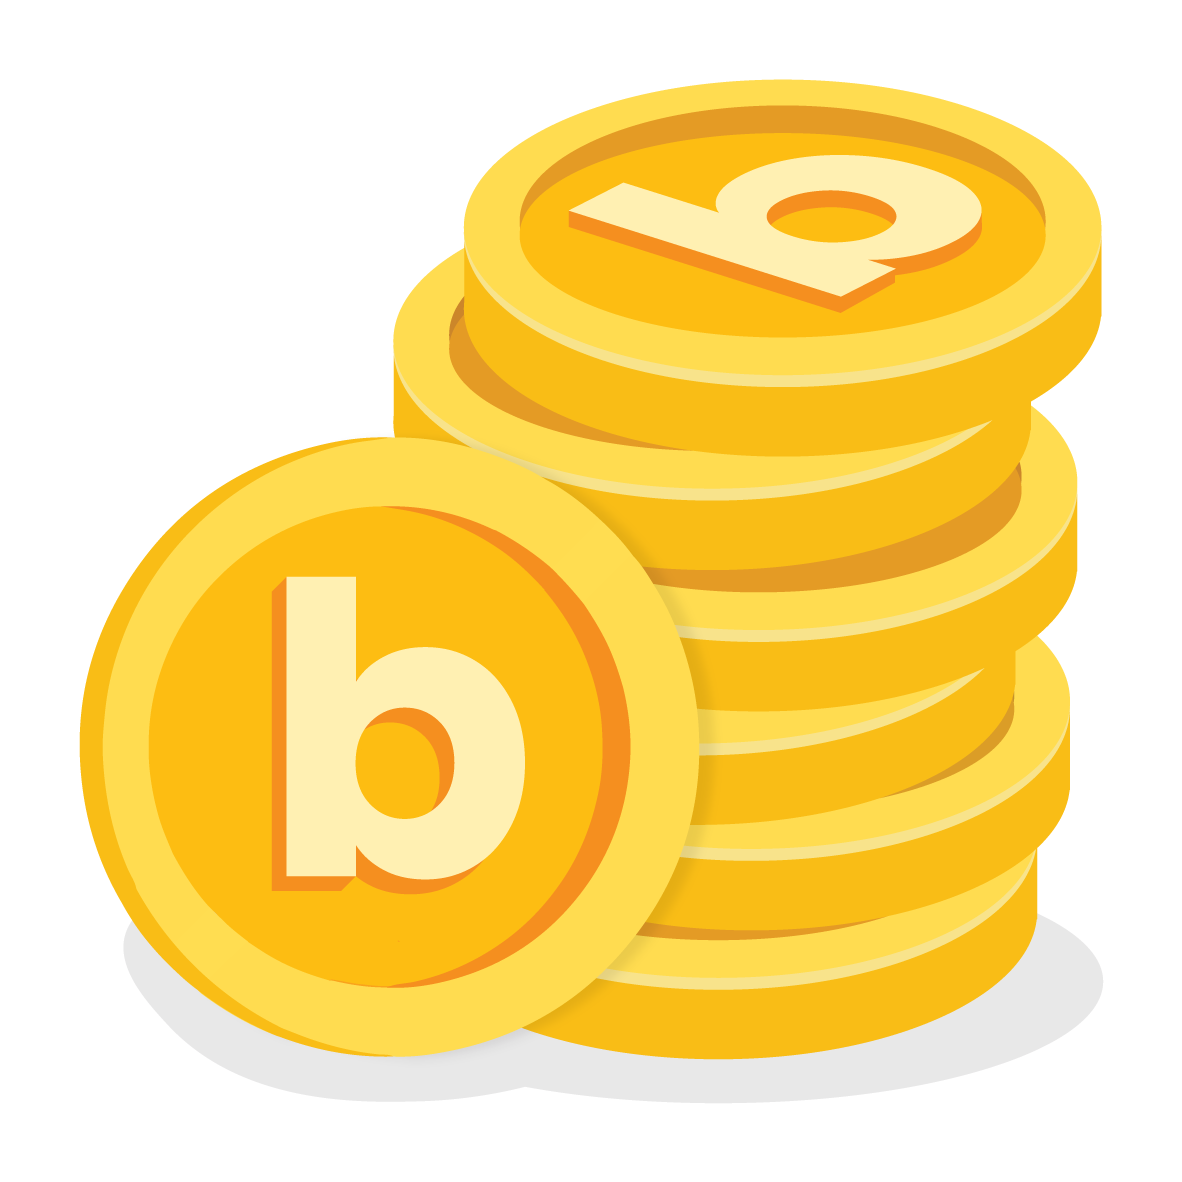 Buzz Points is Buzz's in-app currency where users use to redeem exciting rewards such as gift cards, eVouchers, e-vouchers, vouchers, eWallet Reload PINs, Discount Codes, Promo Codes, Promo Value, Promo Discount, and more.